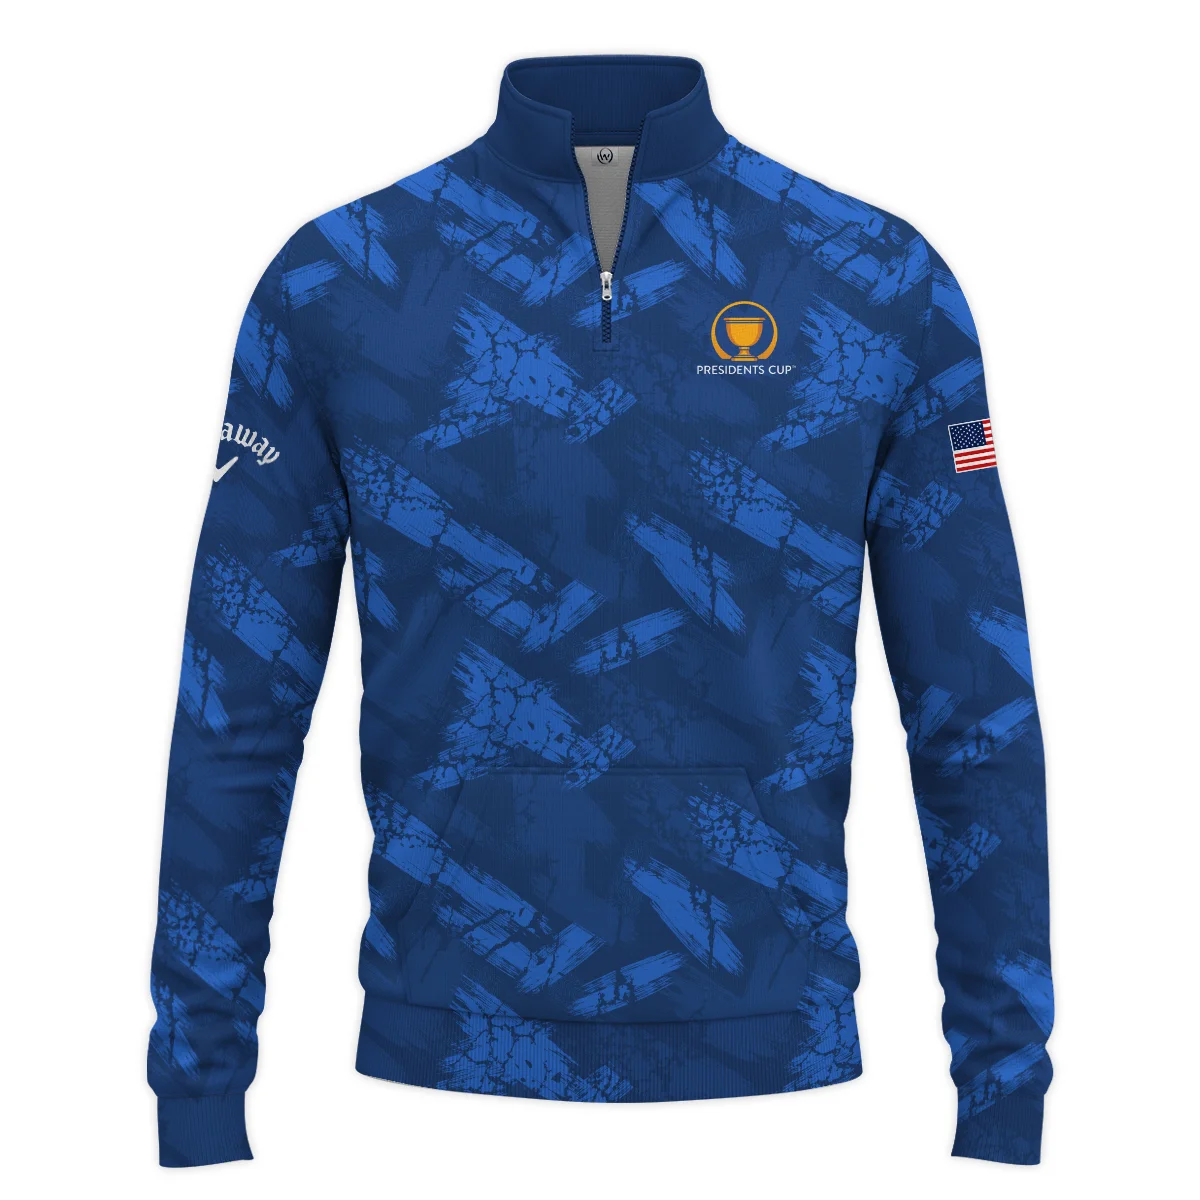 Golf Dark Blue With Grunge Pattern Presidents Cup Callaway Vneck Polo Shirt All Over Prints  HOPDC210624A01CLWZVPL